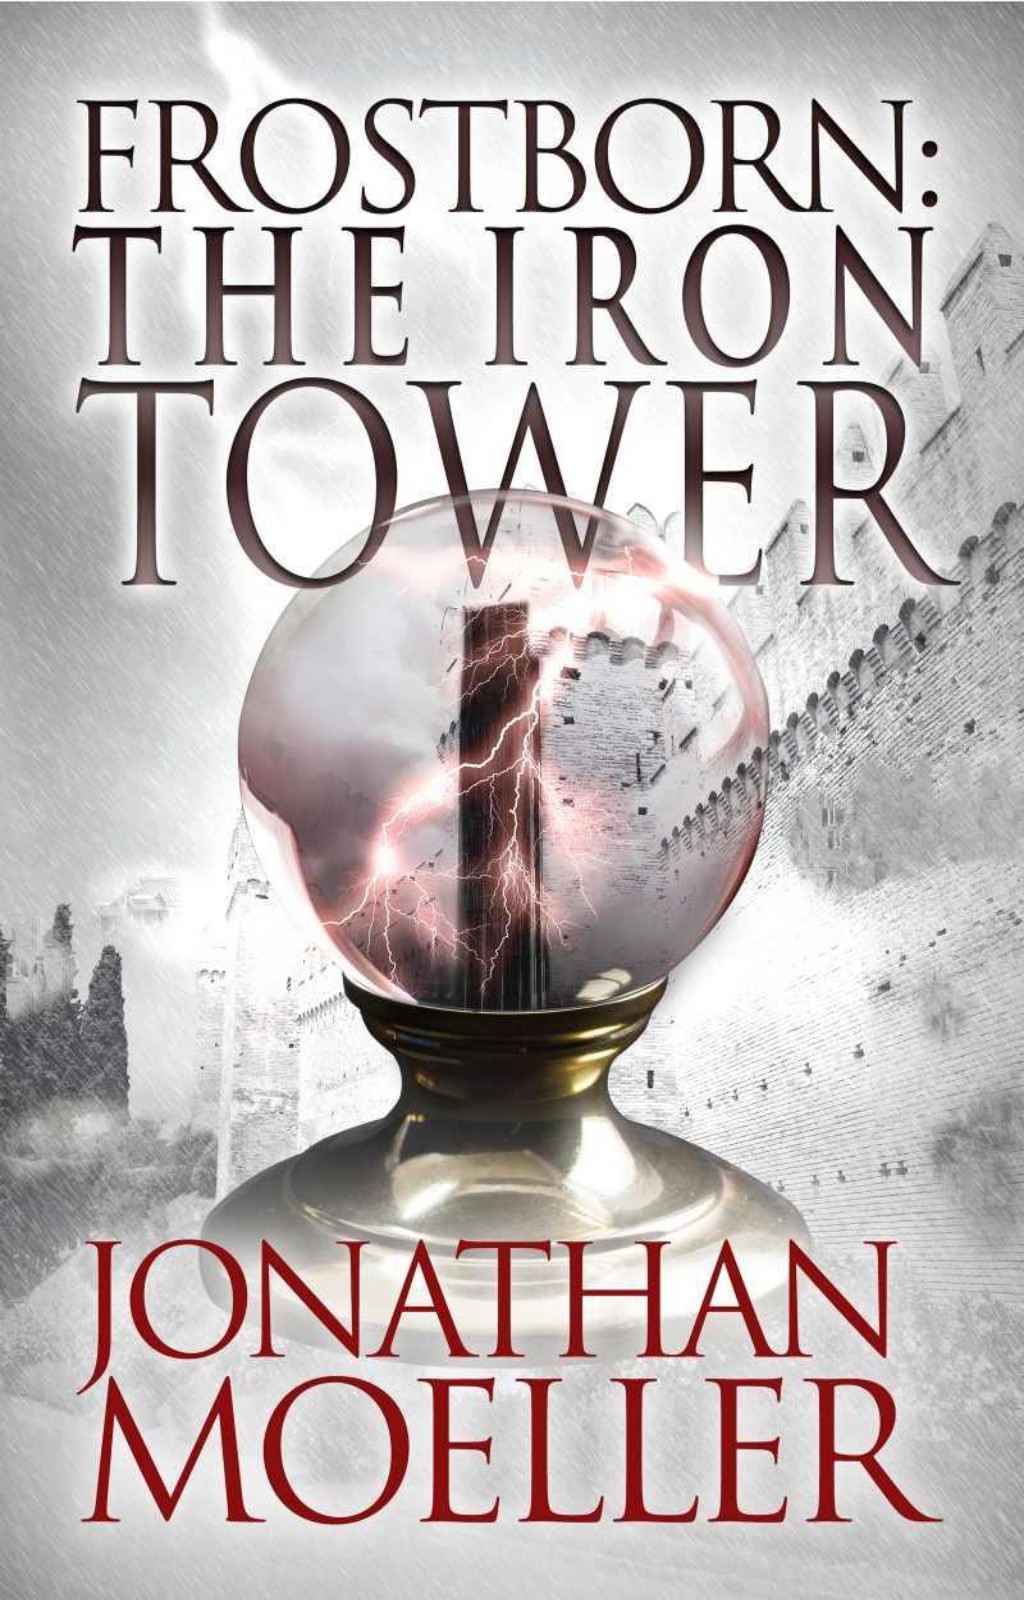 Frostborn: The Iron Tower by Jonathan Moeller